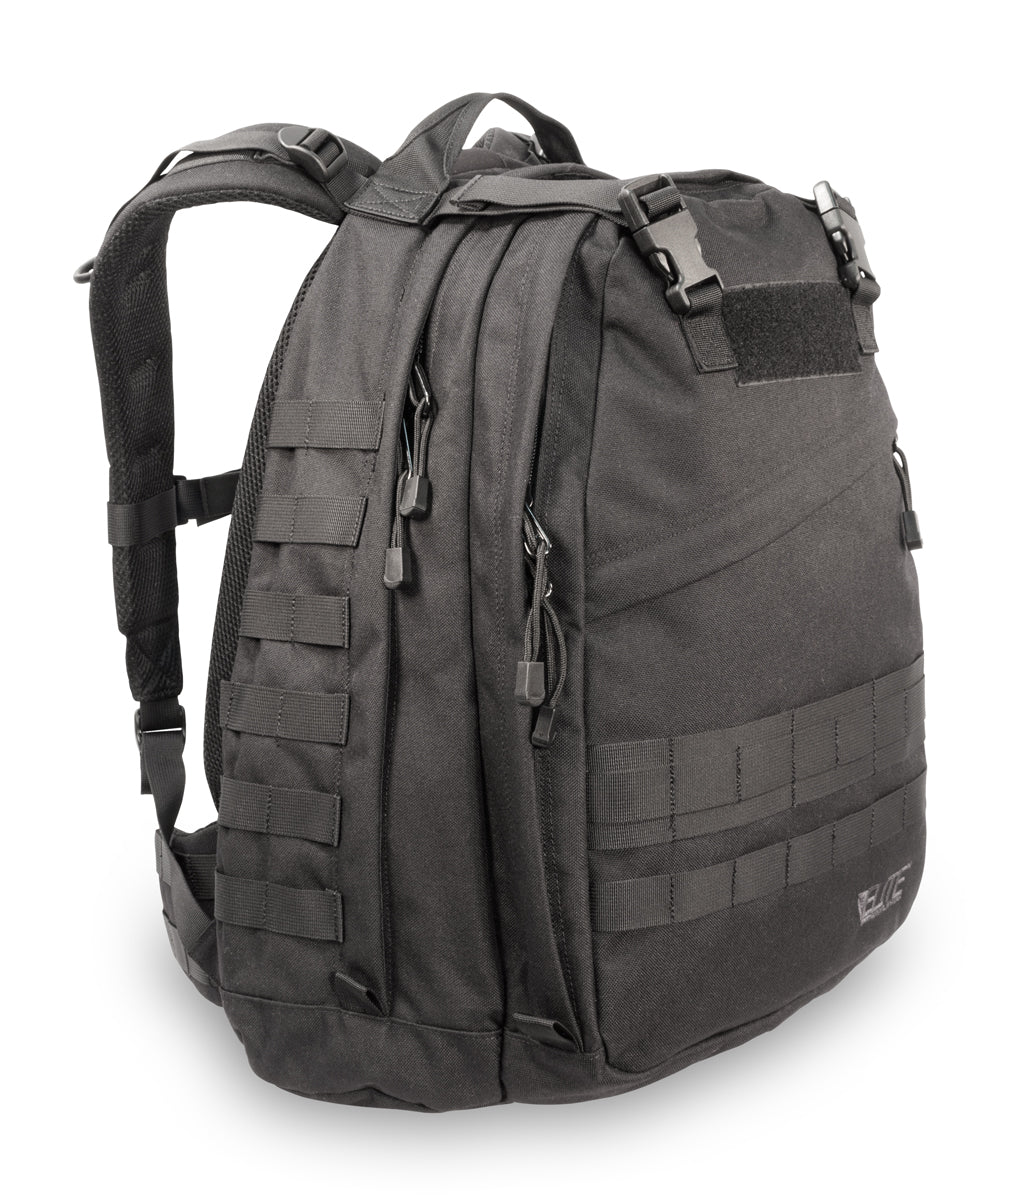 Tactical Gear Bags, Packs & Luggage | Tactical Bags For Sale - Elite ...